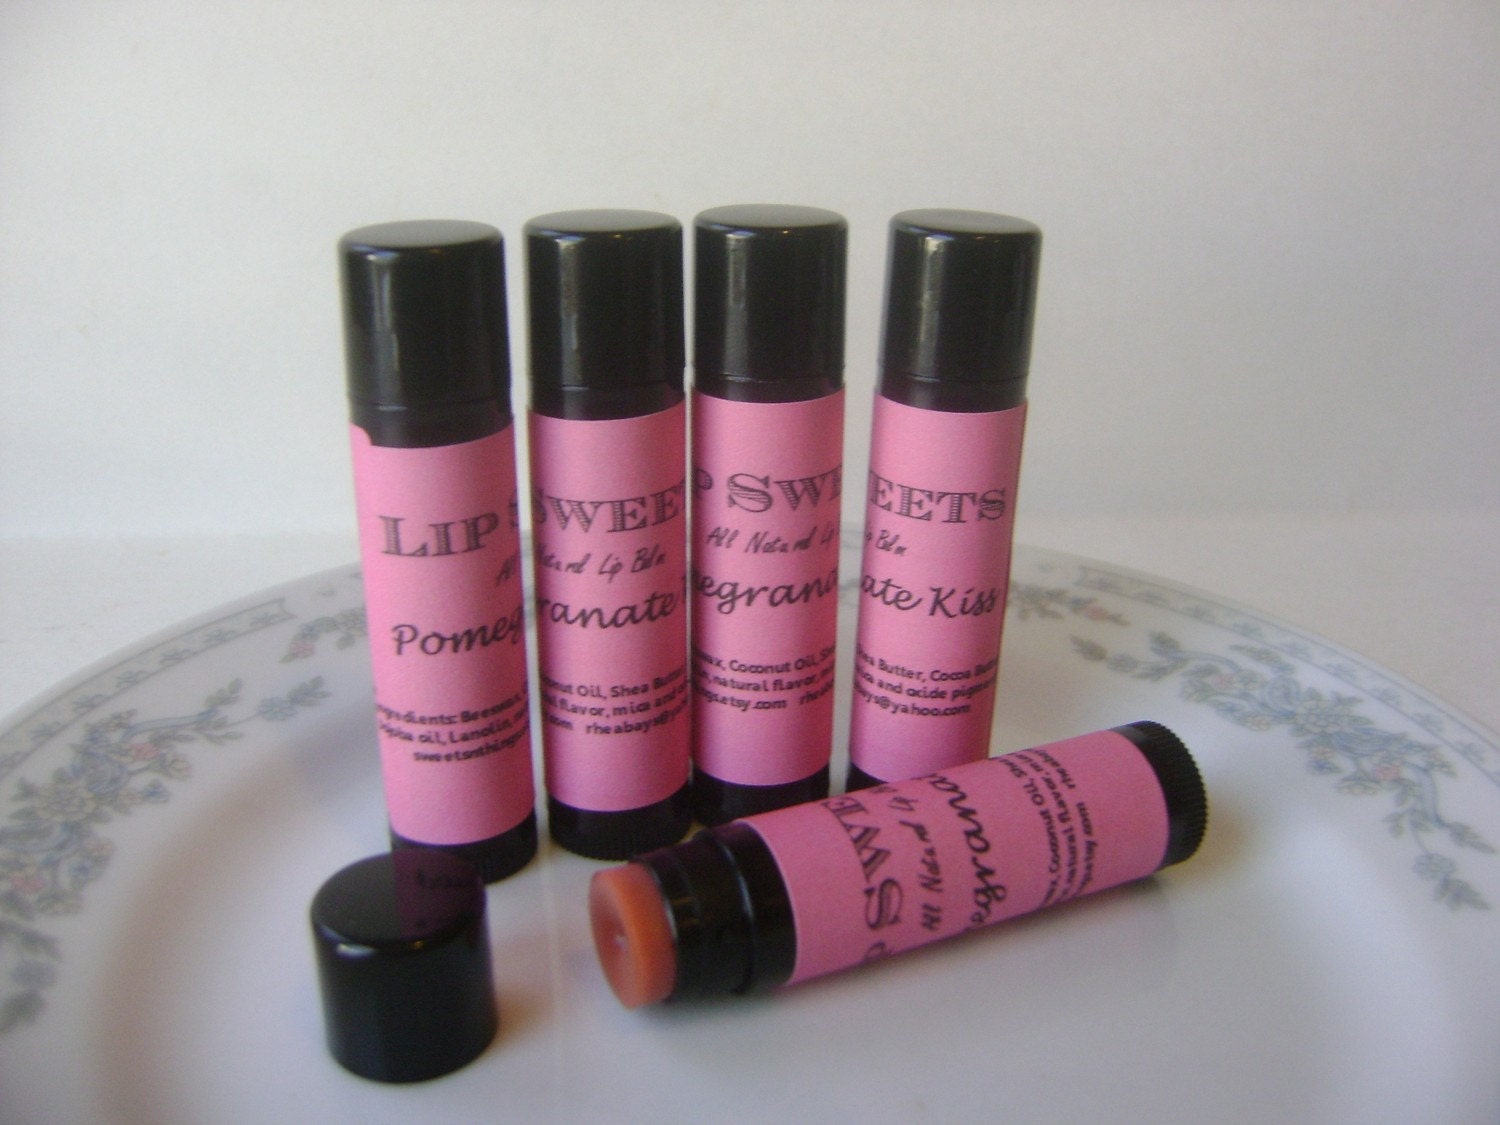 CLEARANCE 25% OFF Lip Sweets All Natural Lip Balm, Pomegranate Kiss